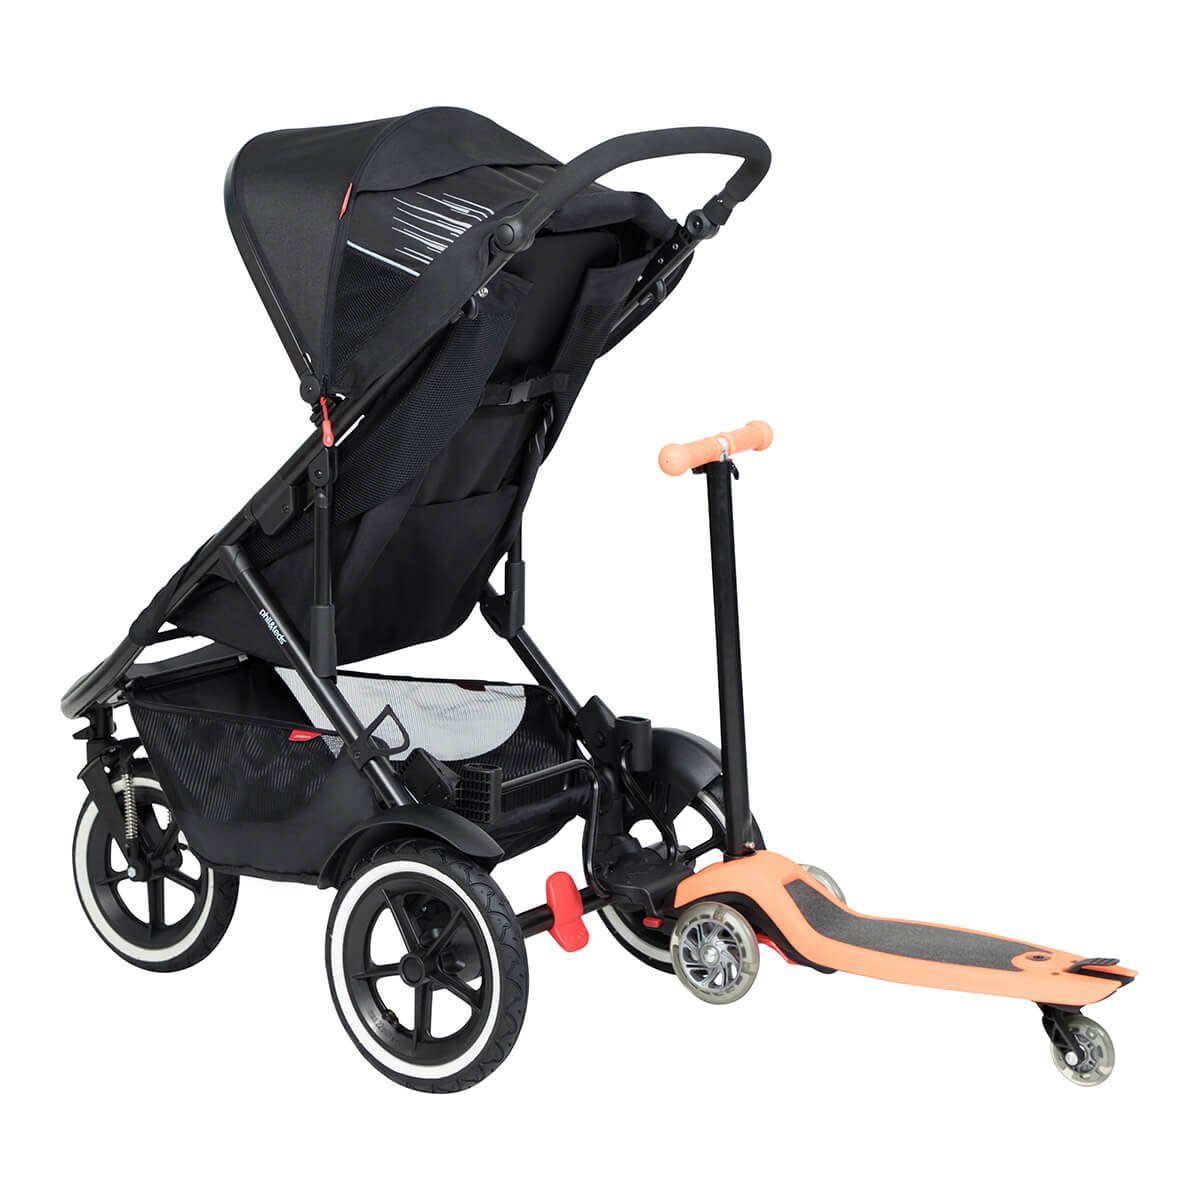 https://cdn.accentuate.io/7671658676402/19437753860274/philteds-sport-buggy-with-freerider-stroller-board-in-rear-v1682472780382.jpg?1200x1200